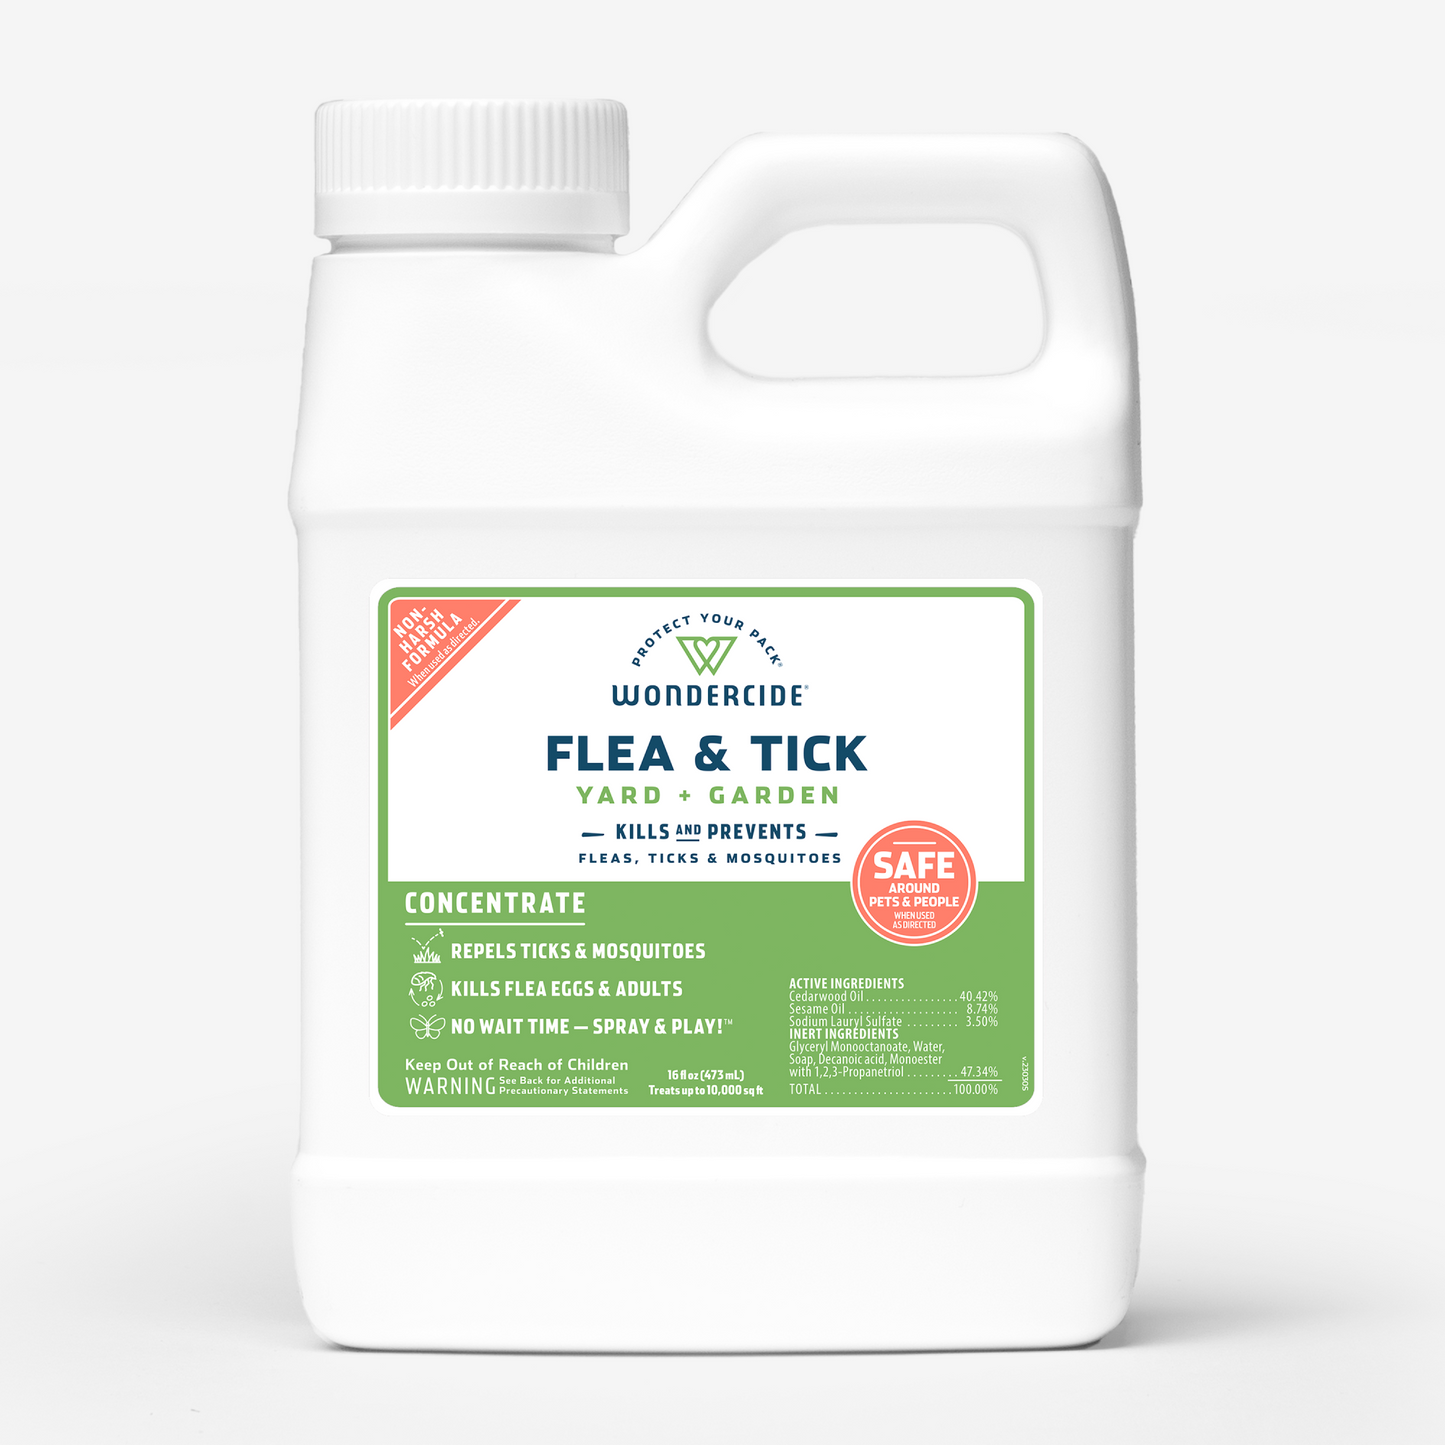 Flea & Tick Concentrate for Yard + Garden with Natural Essential Oils - 16oz